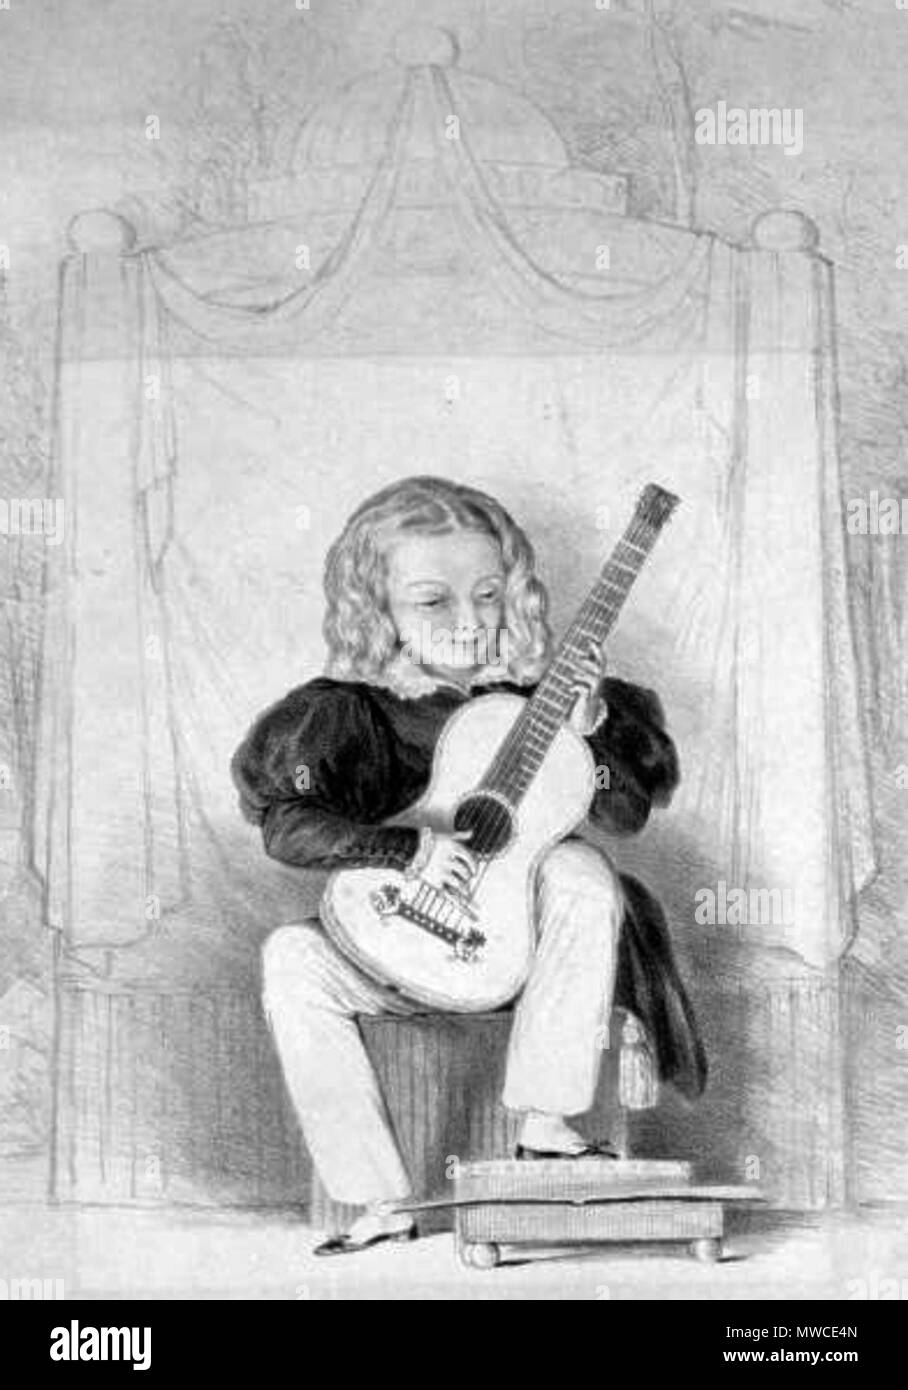 . English: Italian classical guitarist and composer Giulio Regondi (1822-1872) appearing as a child prodigy at the Royal Adelphi Theatre in London on 3 September 1831. 19th century. Unattributed 246 Giulio Regondi at the Royal Adelphi Theatre, London, 1831 Stock Photo